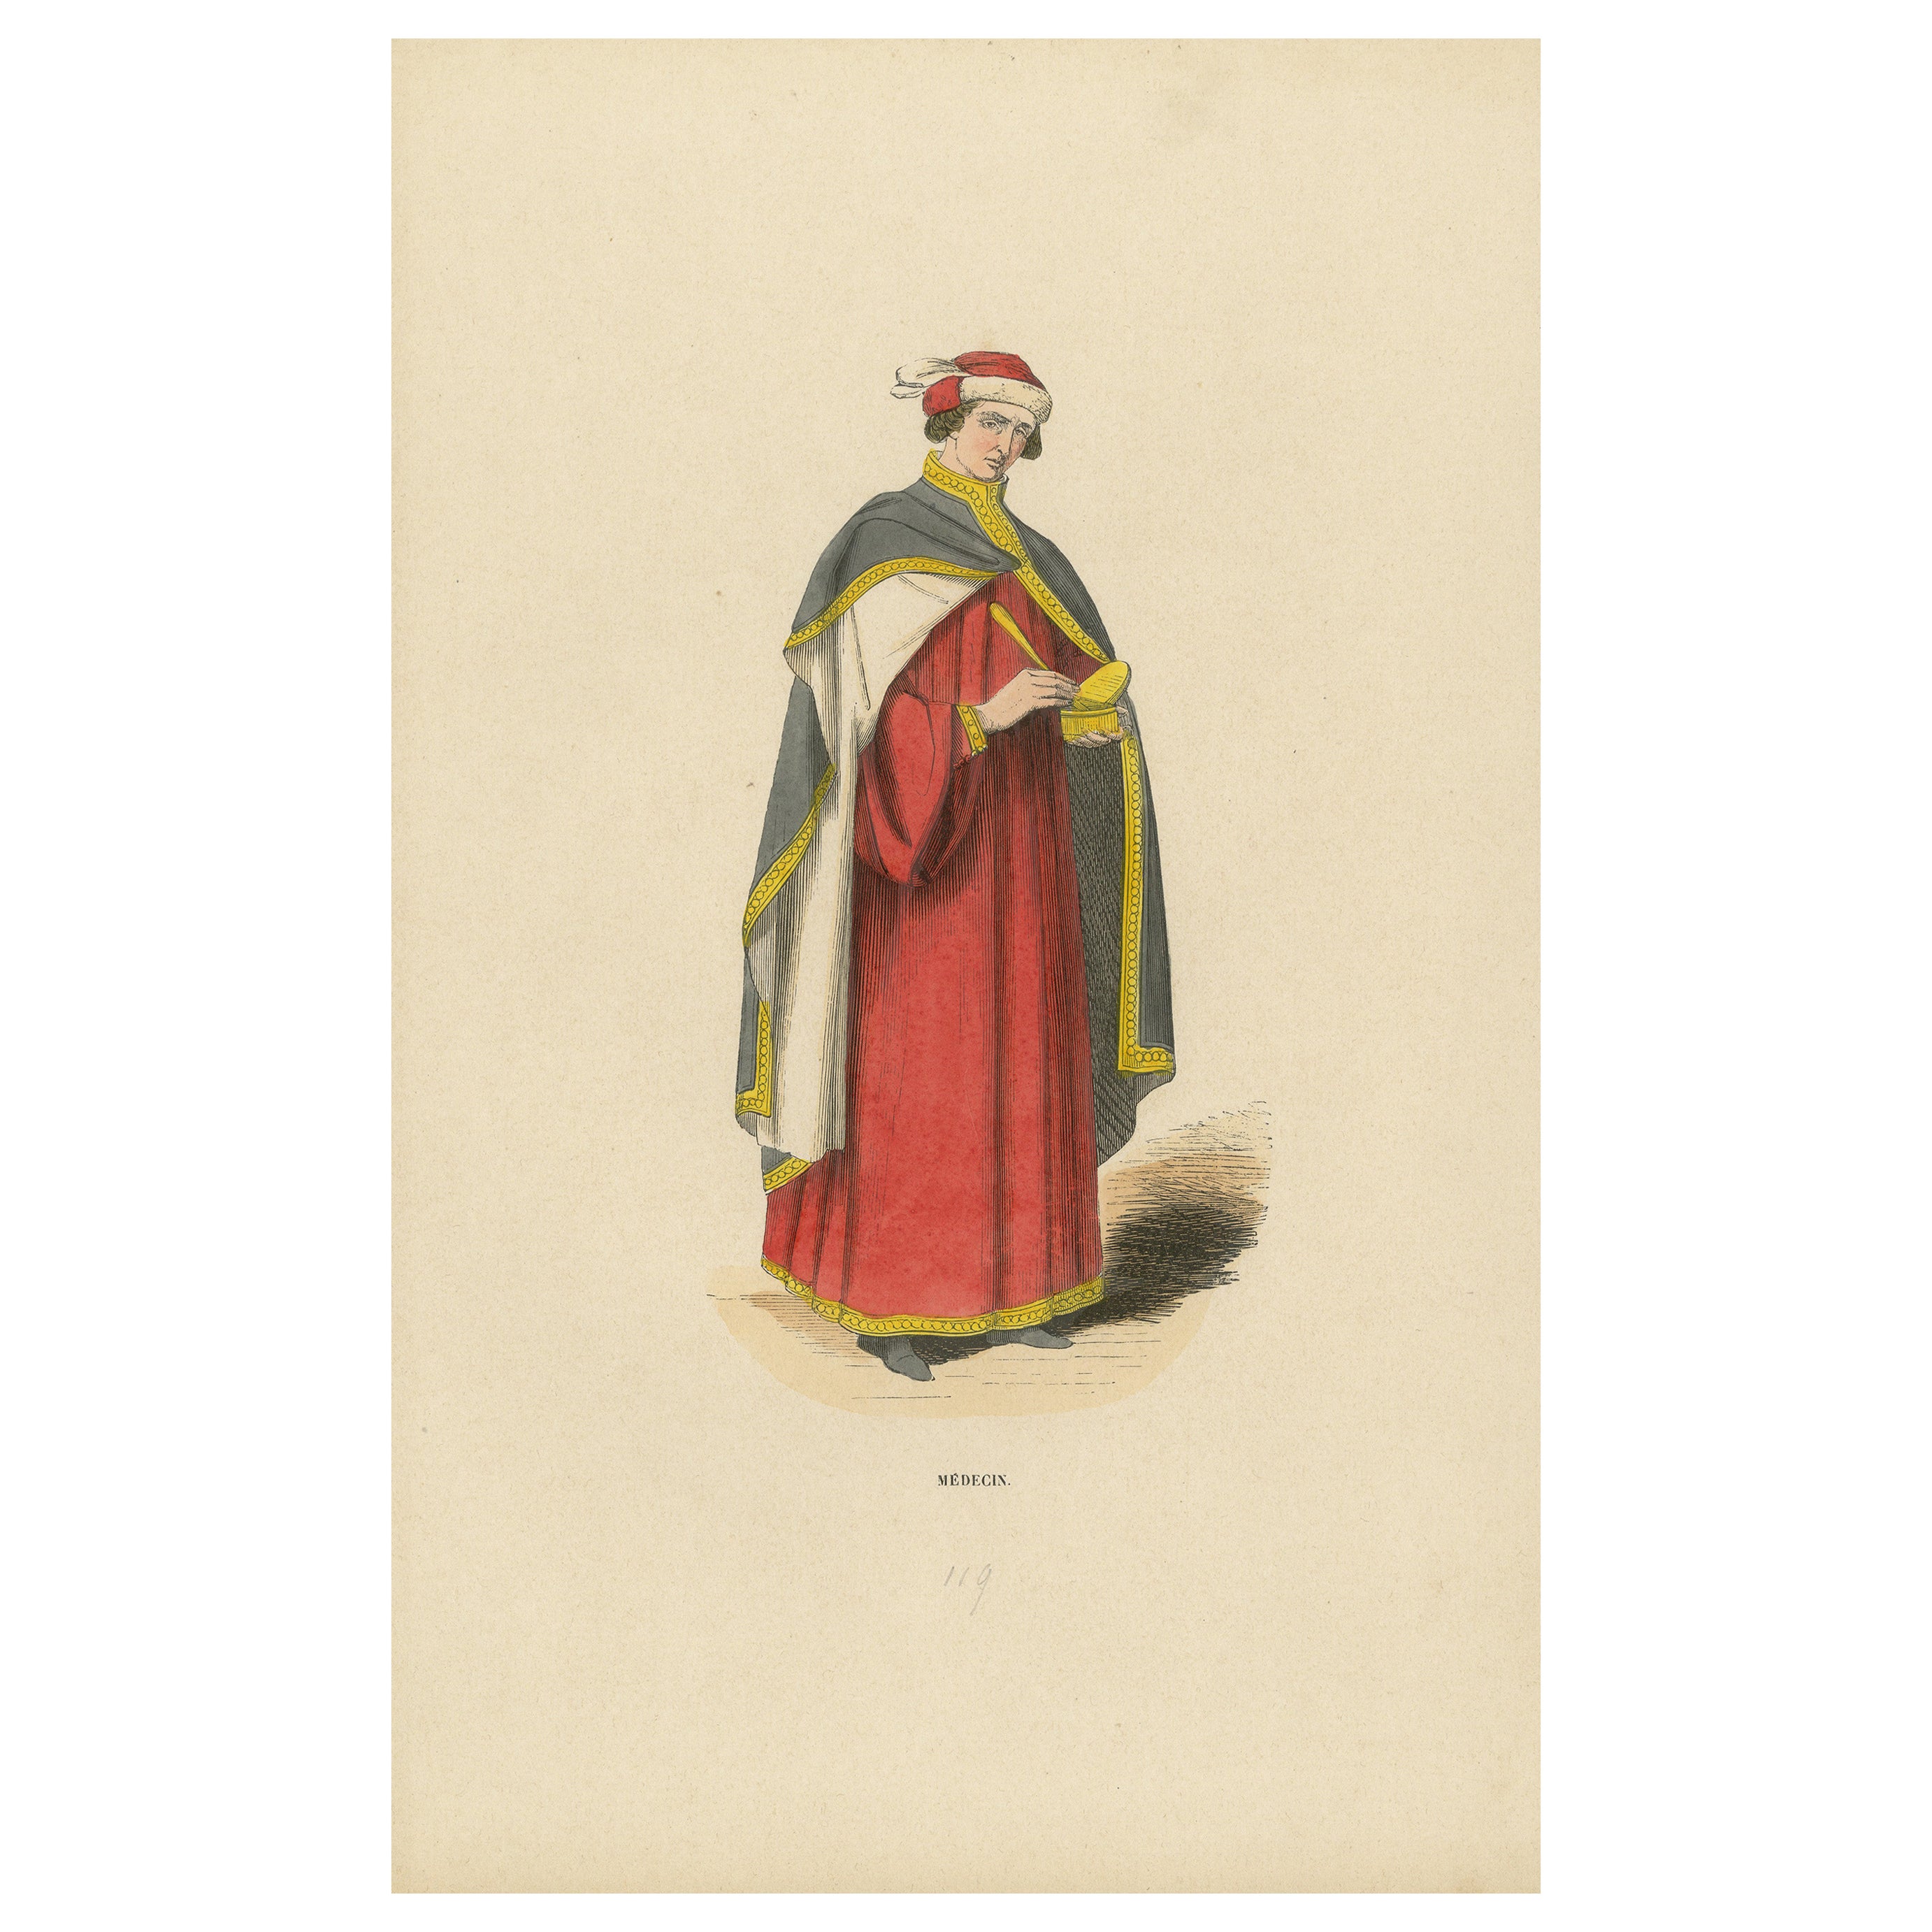 Attire of a Medieval Scholar: The Learned Physician of the Middle Ages, 1847